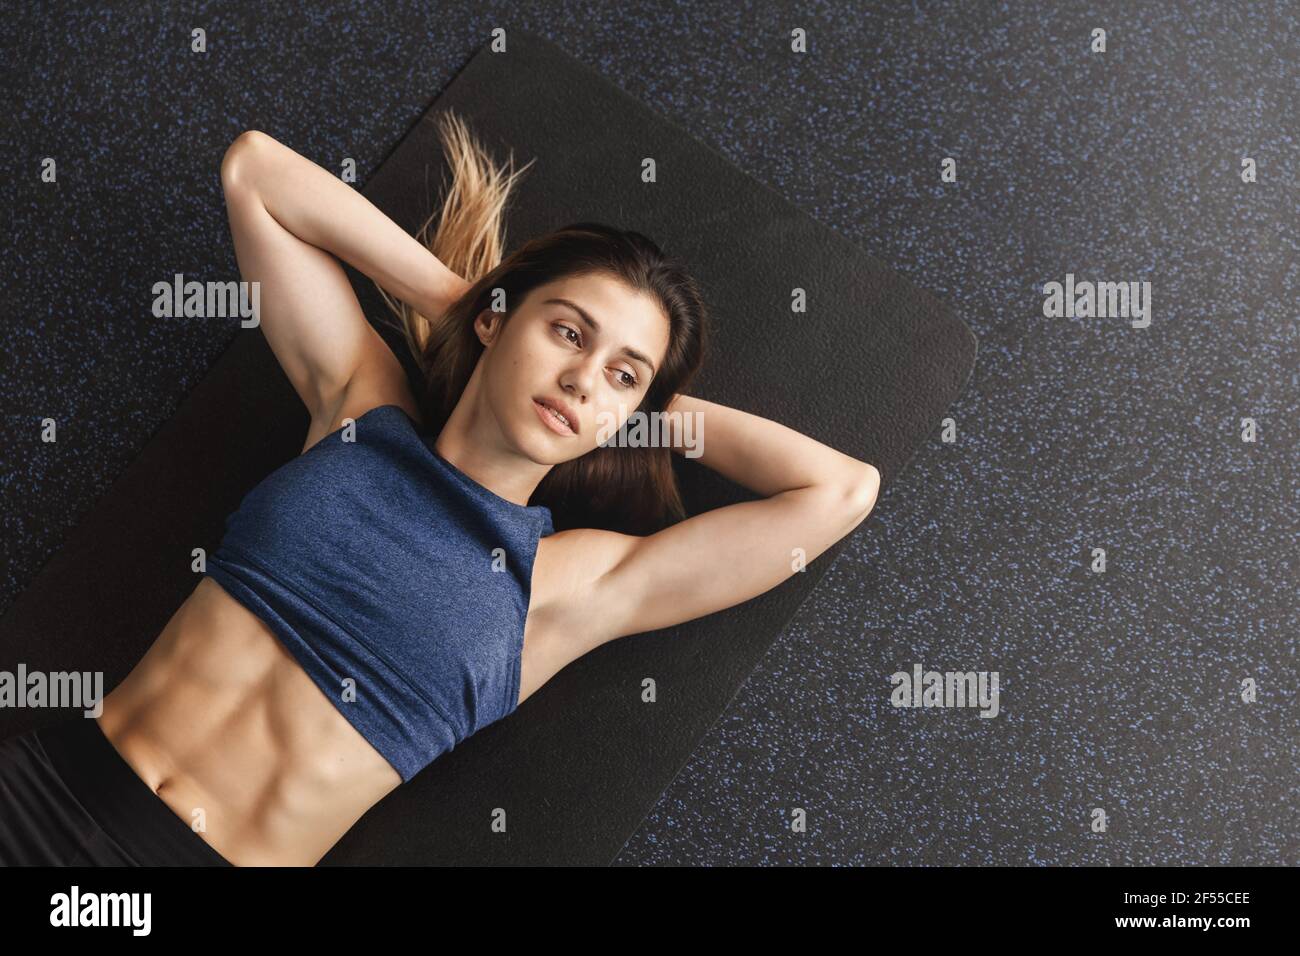 https://c8.alamy.com/comp/2F55CEE/bodycare-sports-and-workout-concept-motivated-sportswoman-working-hard-on-getting-abs-muscles-fit-lying-black-rubber-mat-gym-floor-warm-up-2F55CEE.jpg